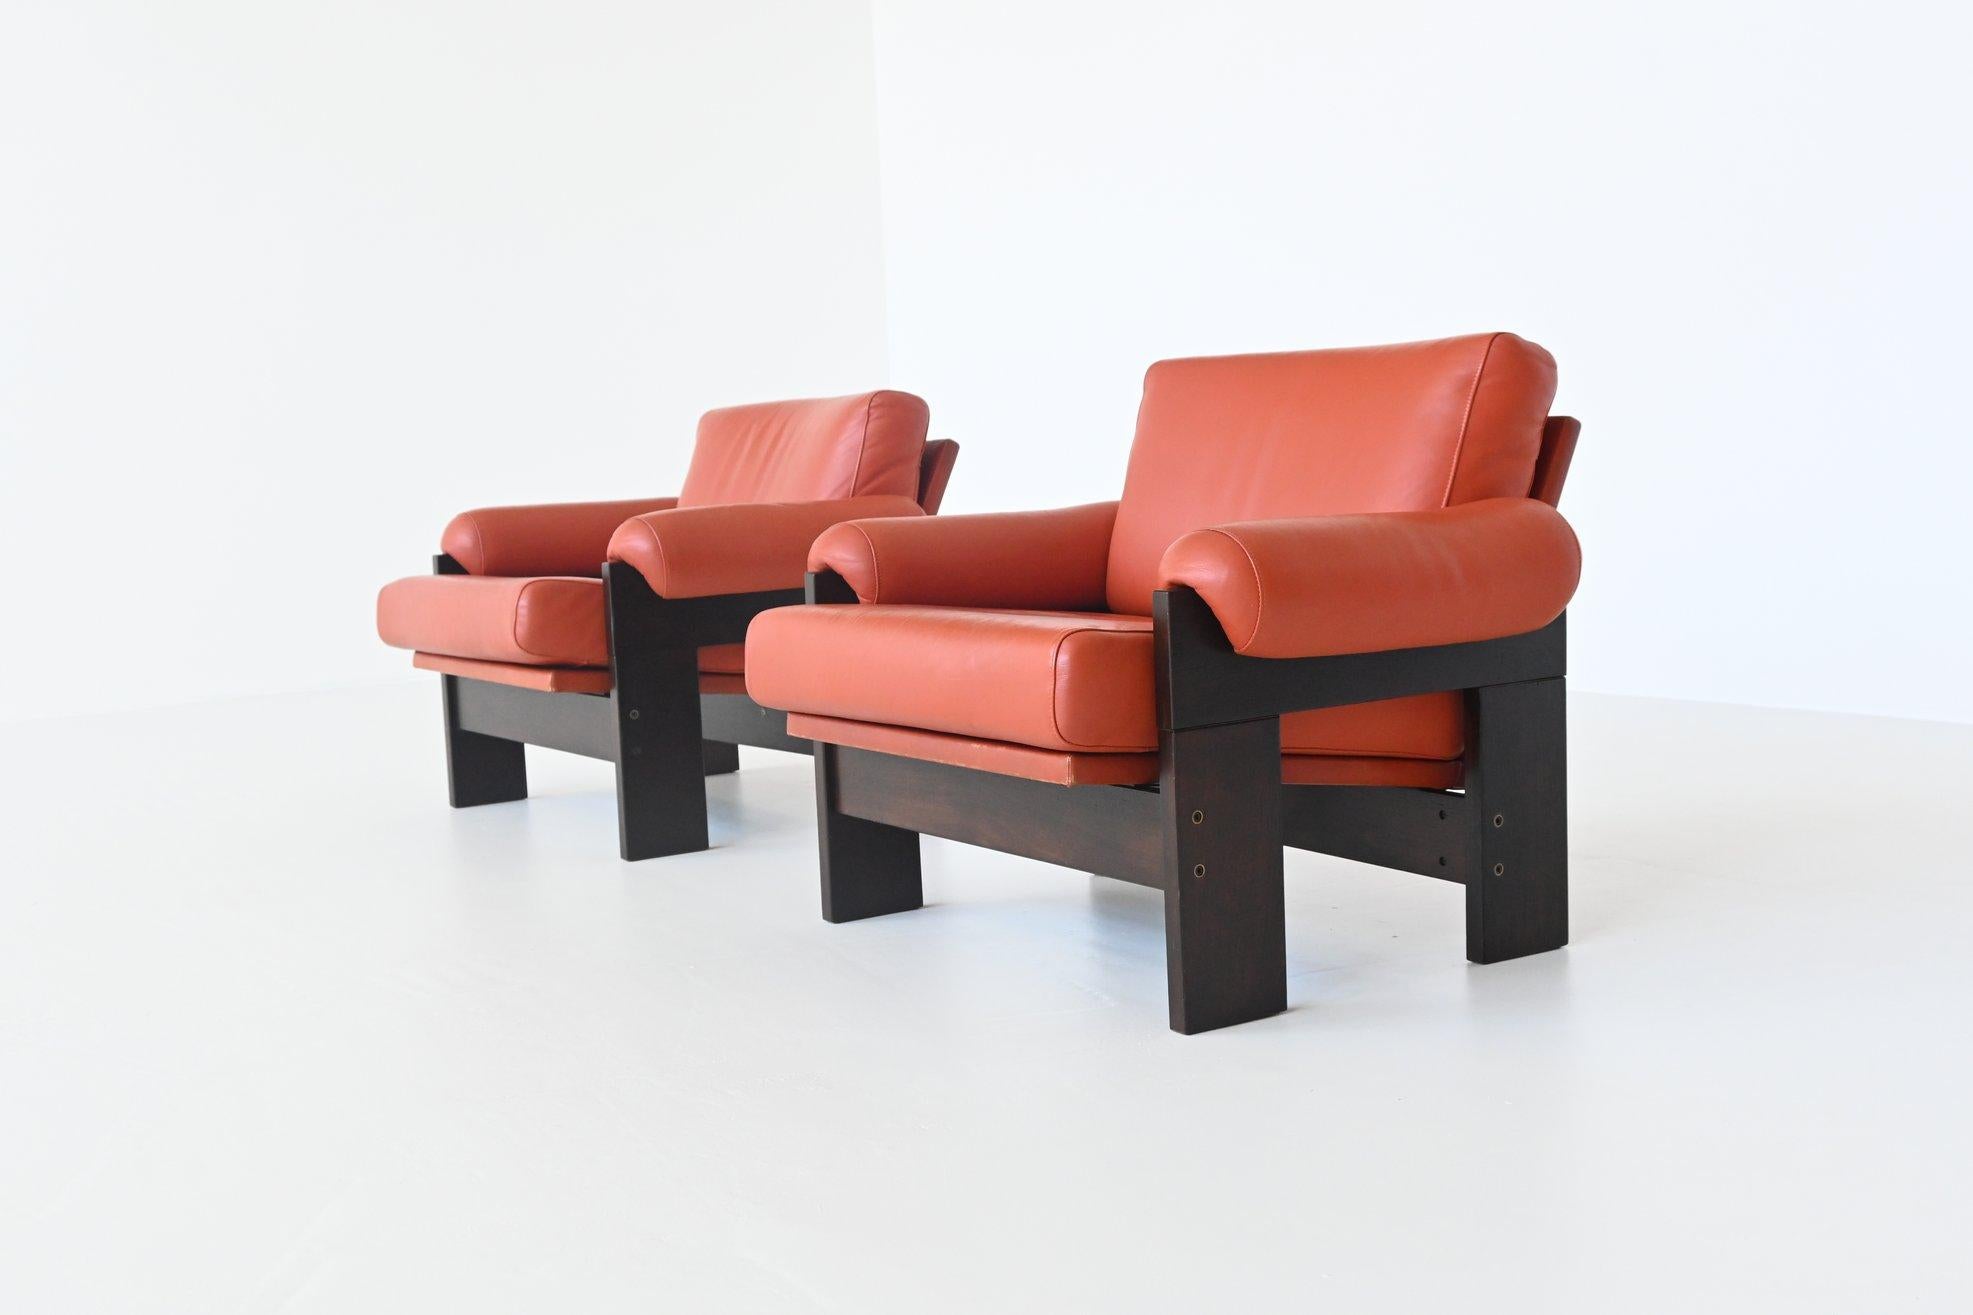 Beautiful pair of lounge chairs model SZ74 designed by Martin Visser and manufactured by 't Spectrum Bergeijk, The Netherlands, 1969. These comfortable lounge chairs have a solid wenge wood frame and they are upholstered with very nice cognac